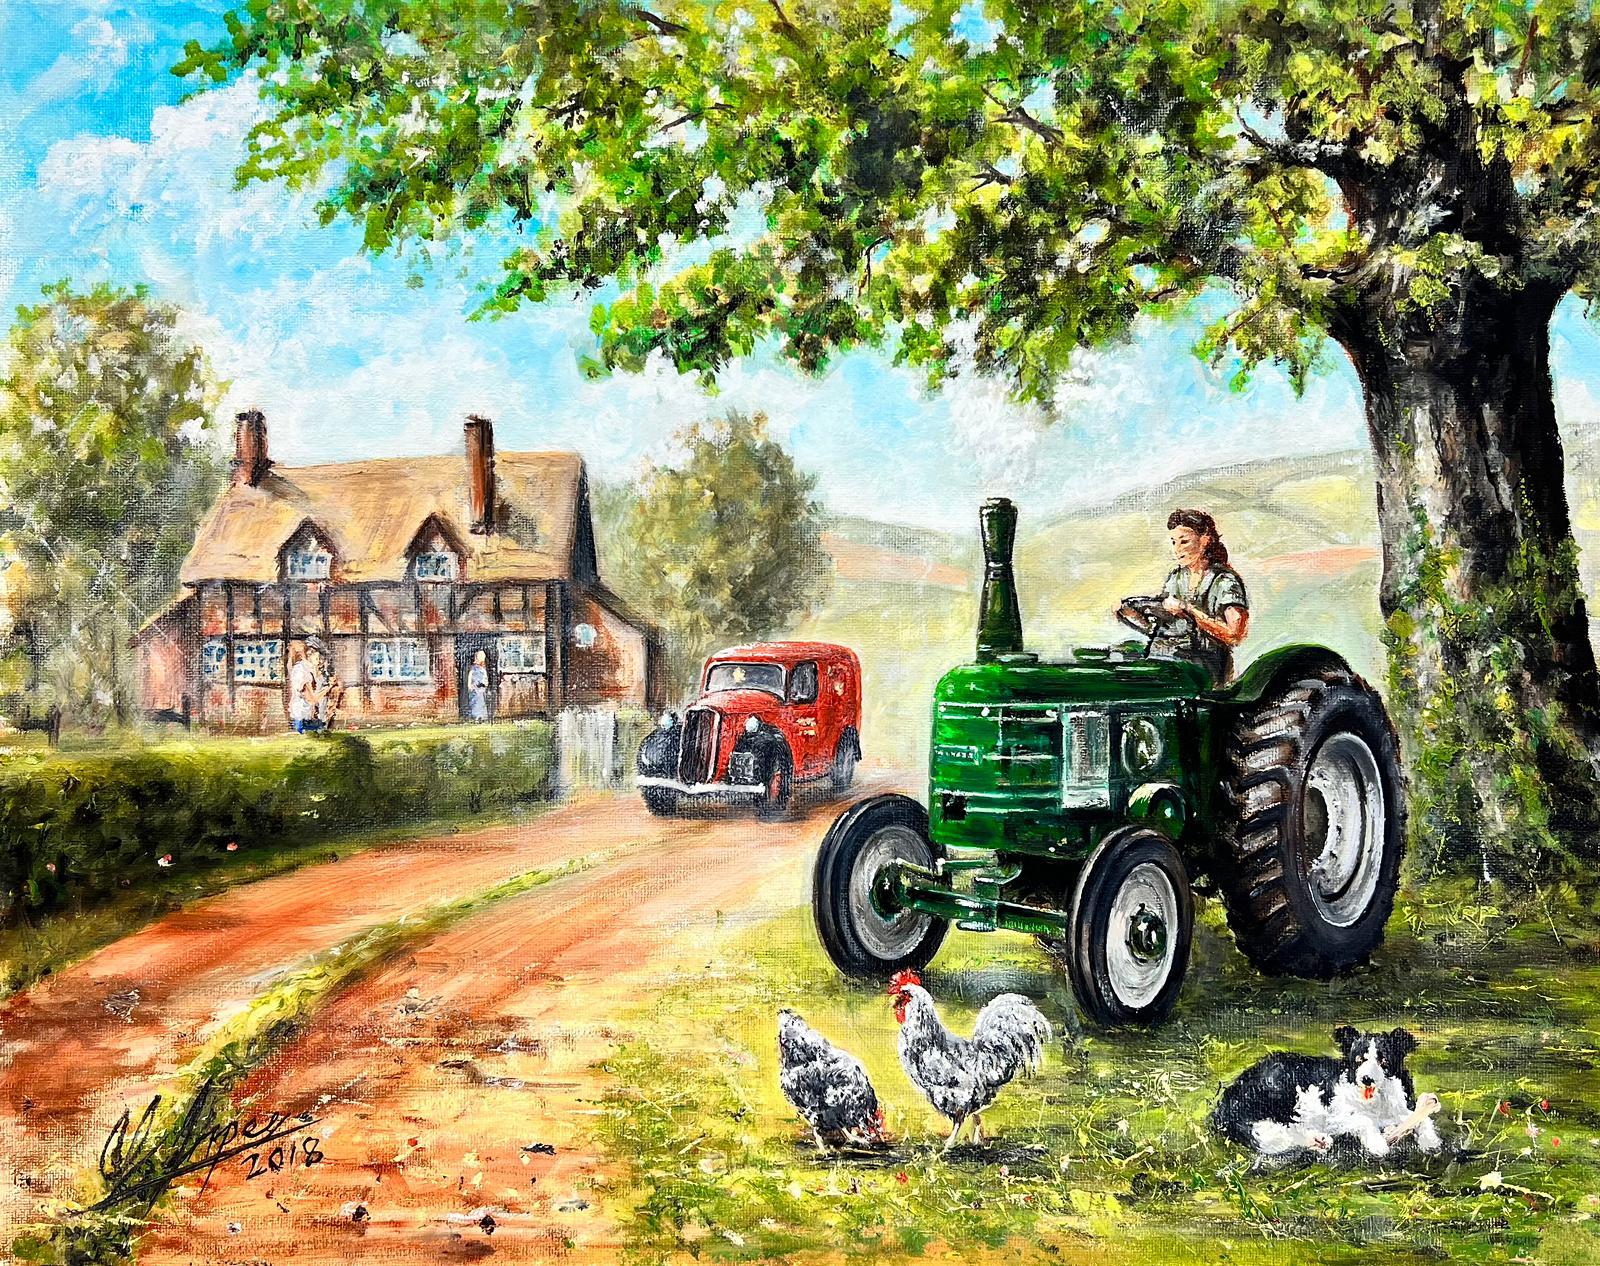 Tractor with Lady Driver Post Office Van & Farmhouse, rural, englisches Öl 